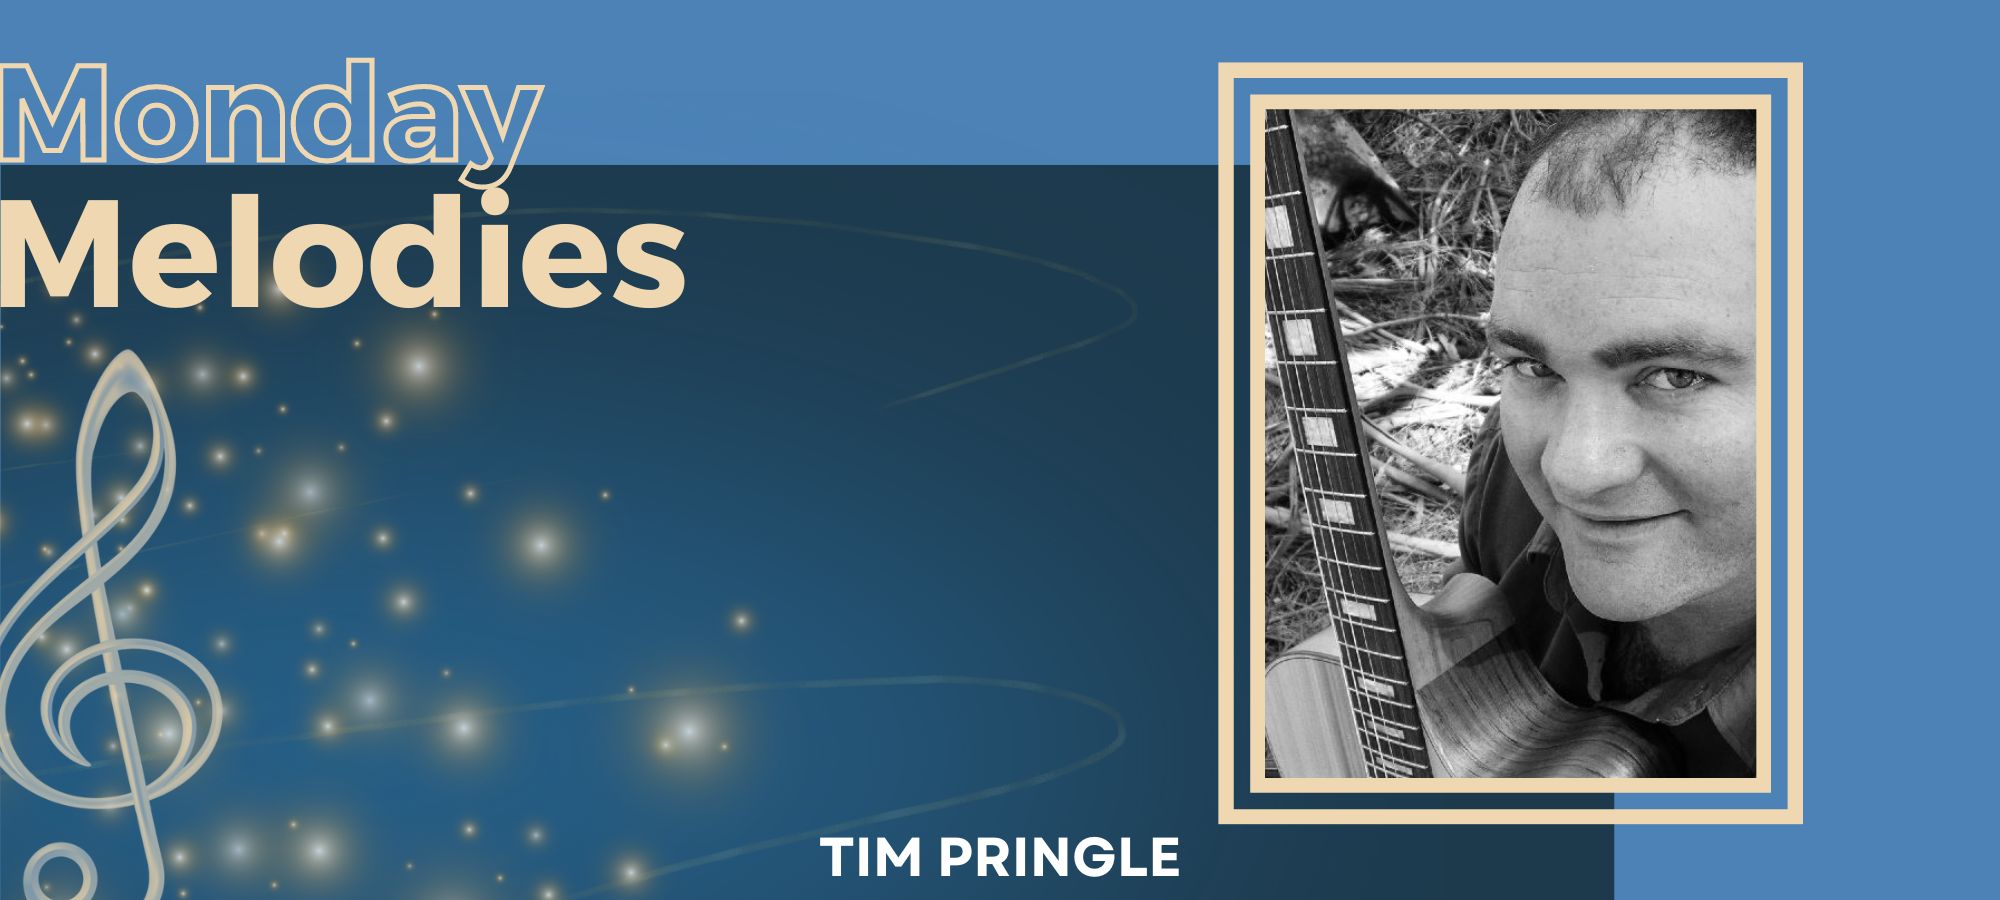 Monday Melodies with Tim Pringle